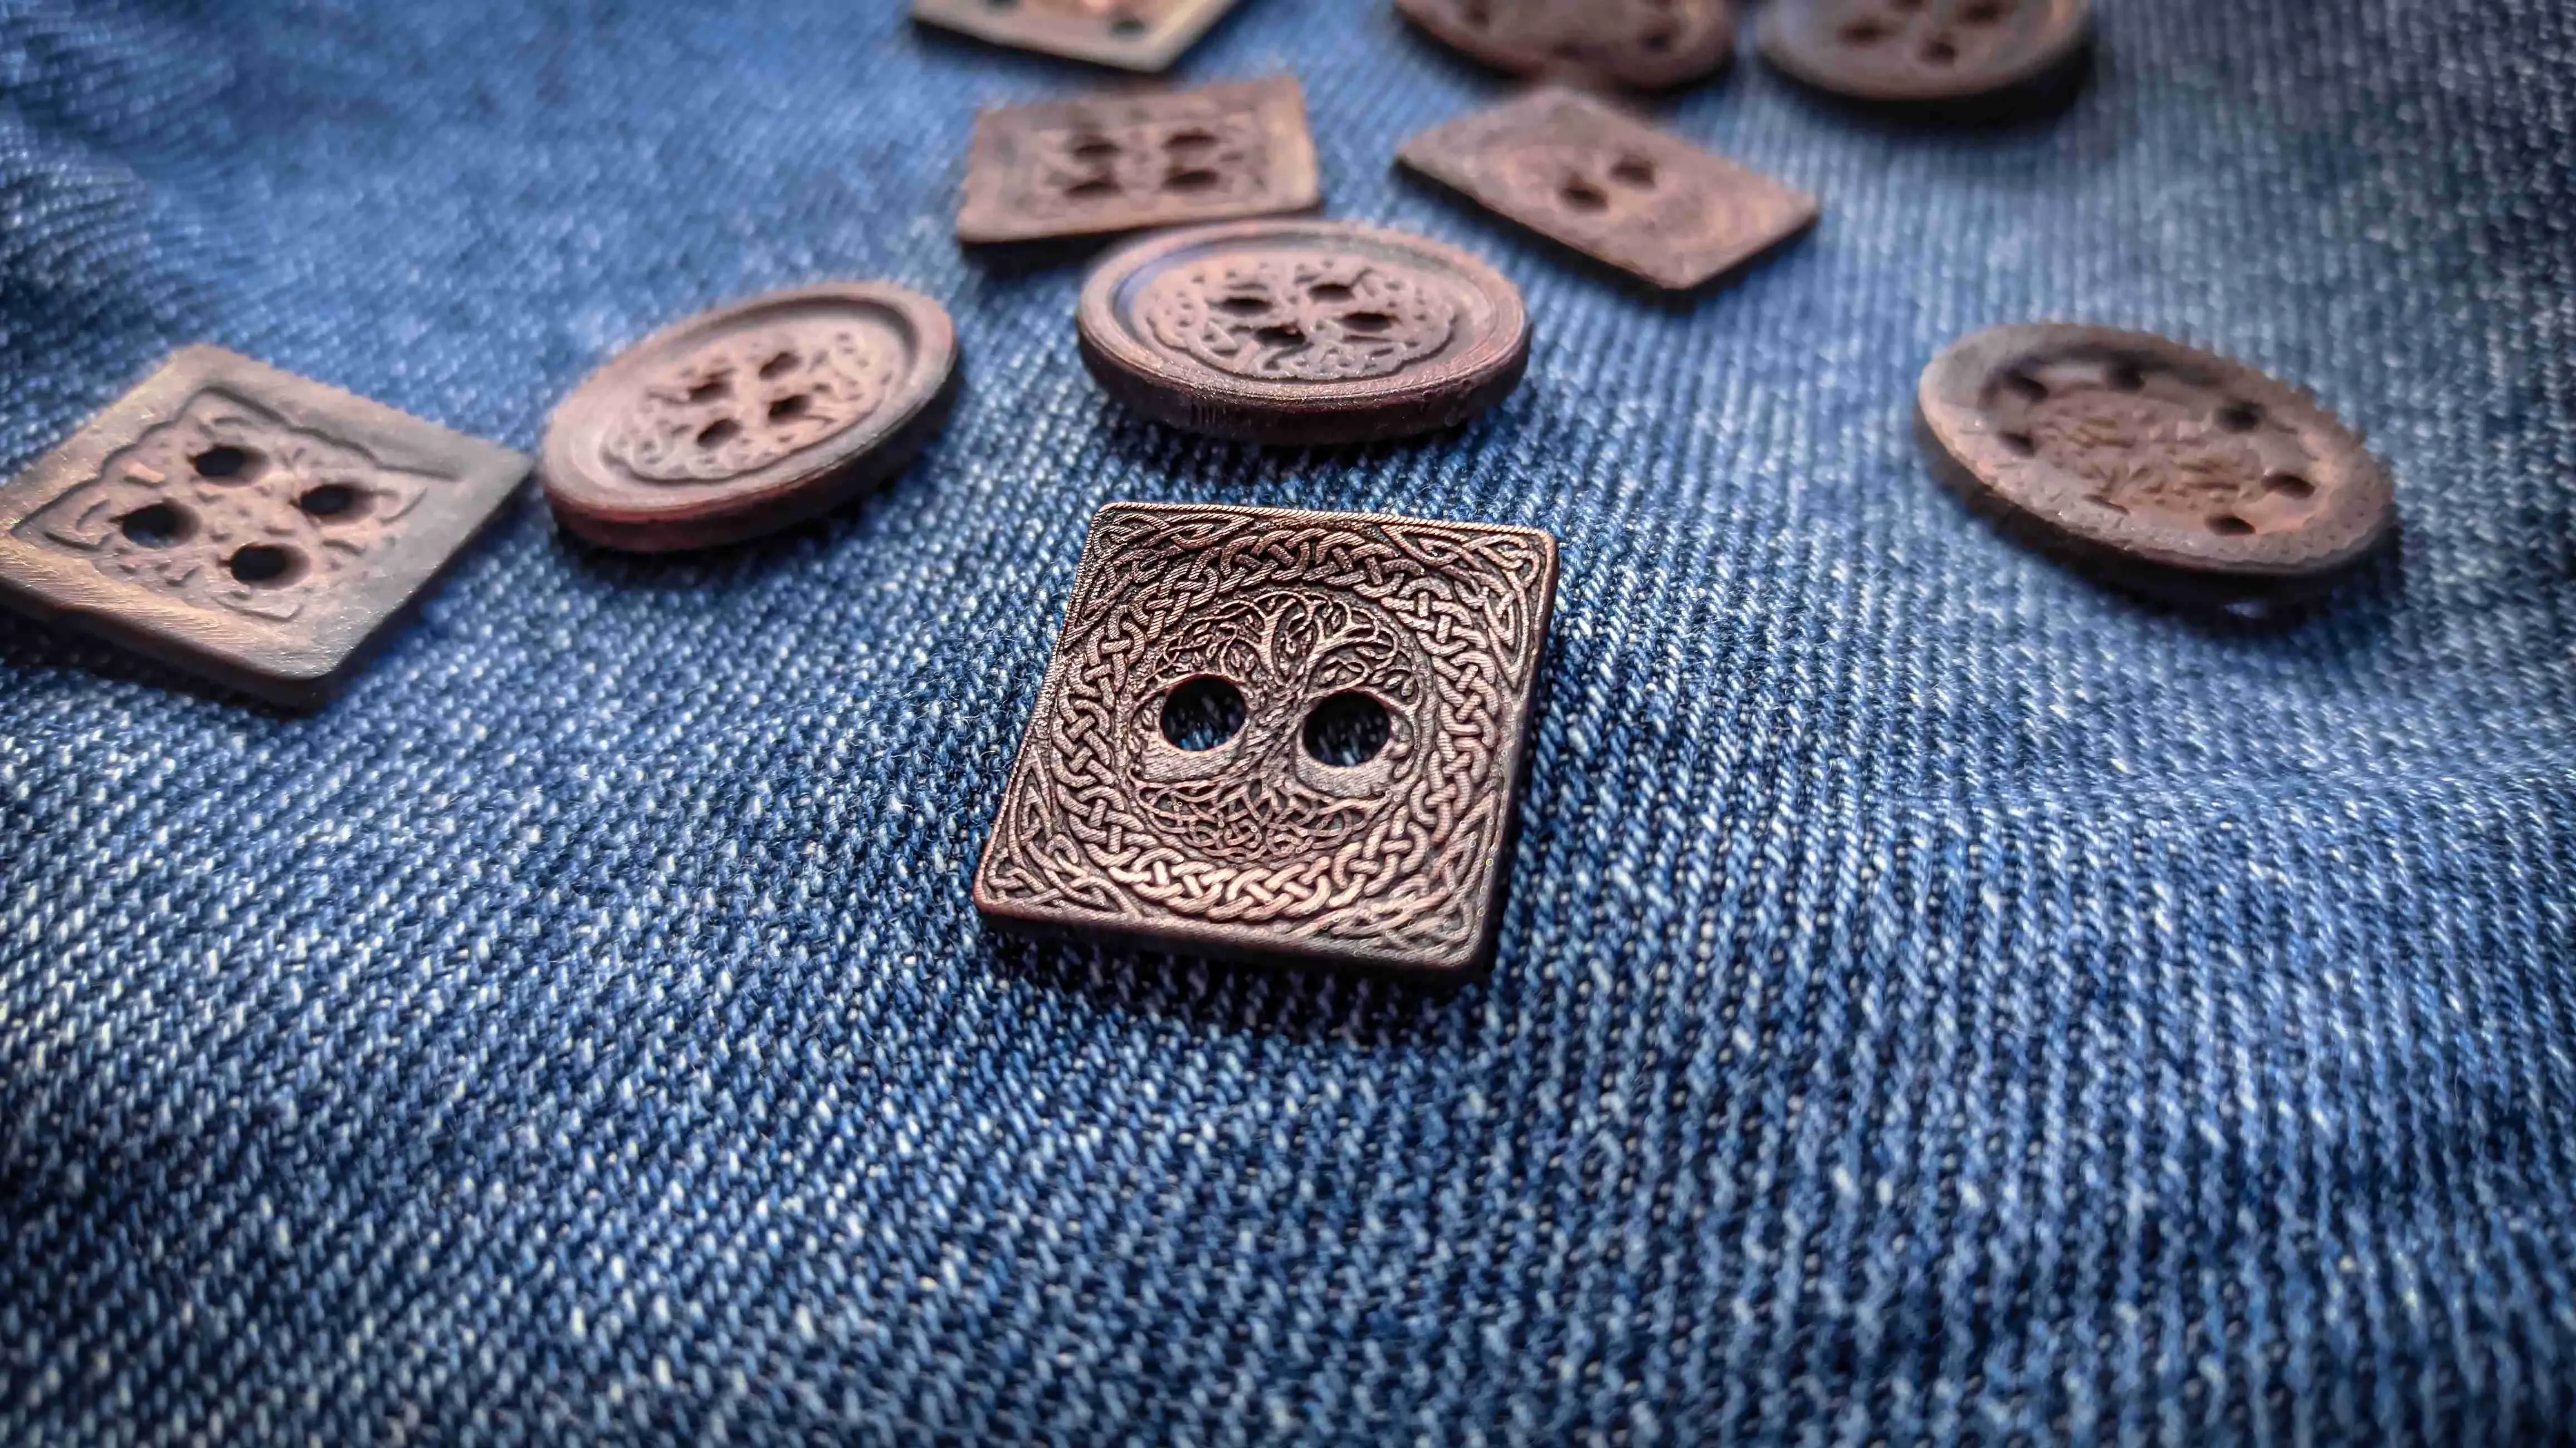 Buttons in Scandinavian style